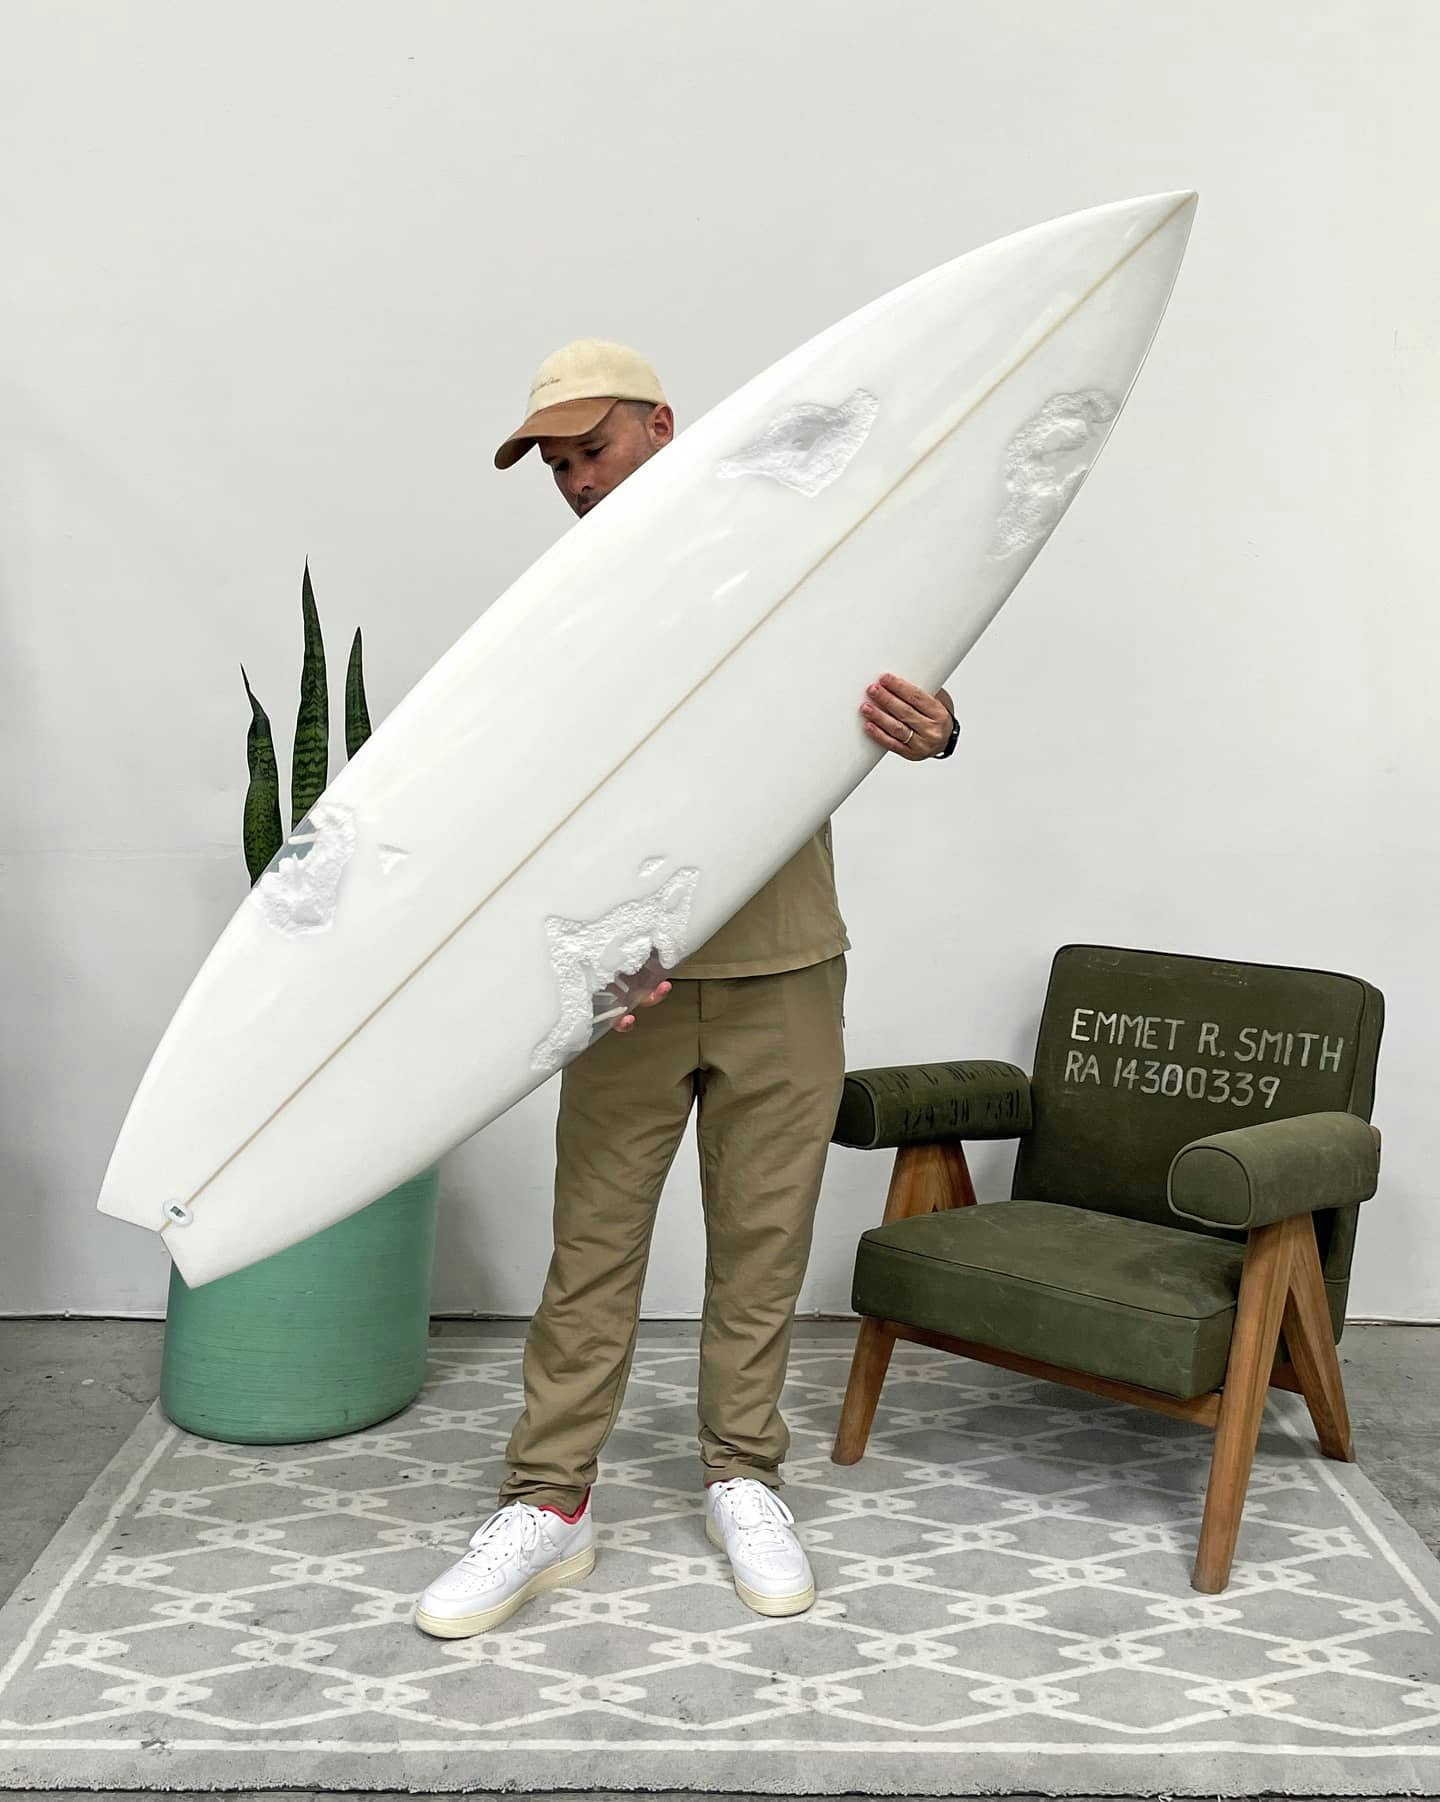 Artist with Surfboard